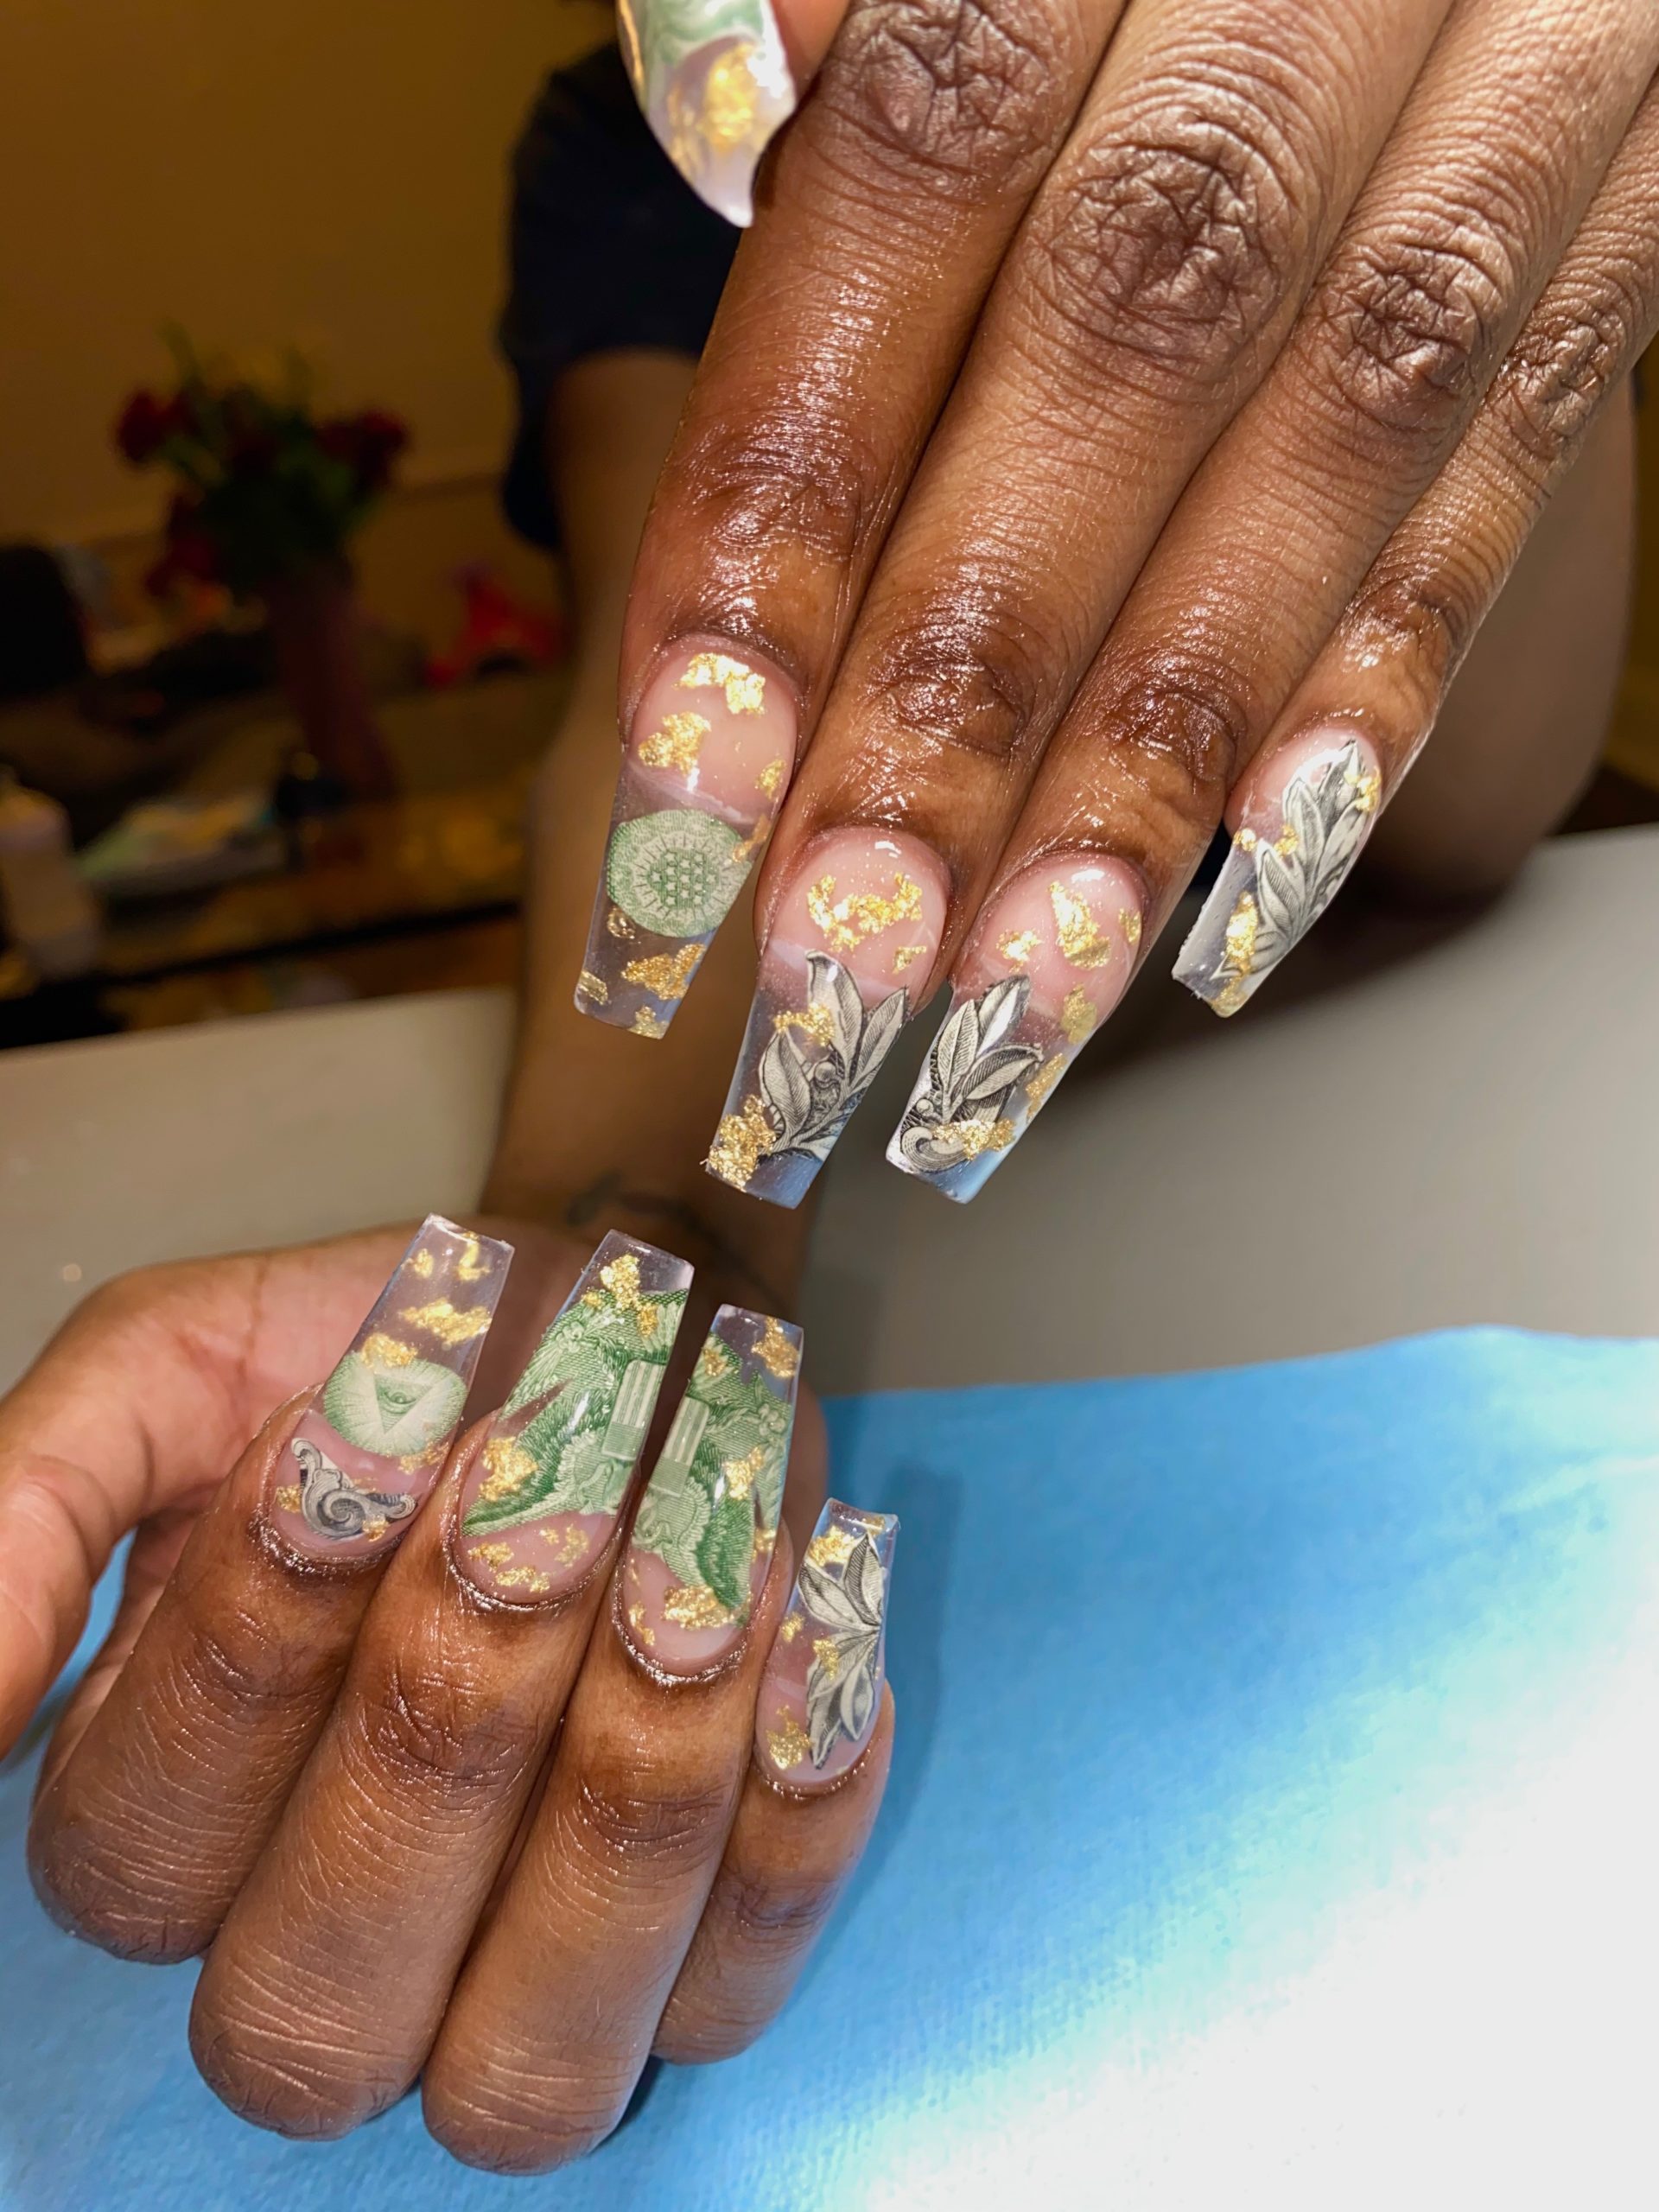 Student’s nail art business sees rapid success